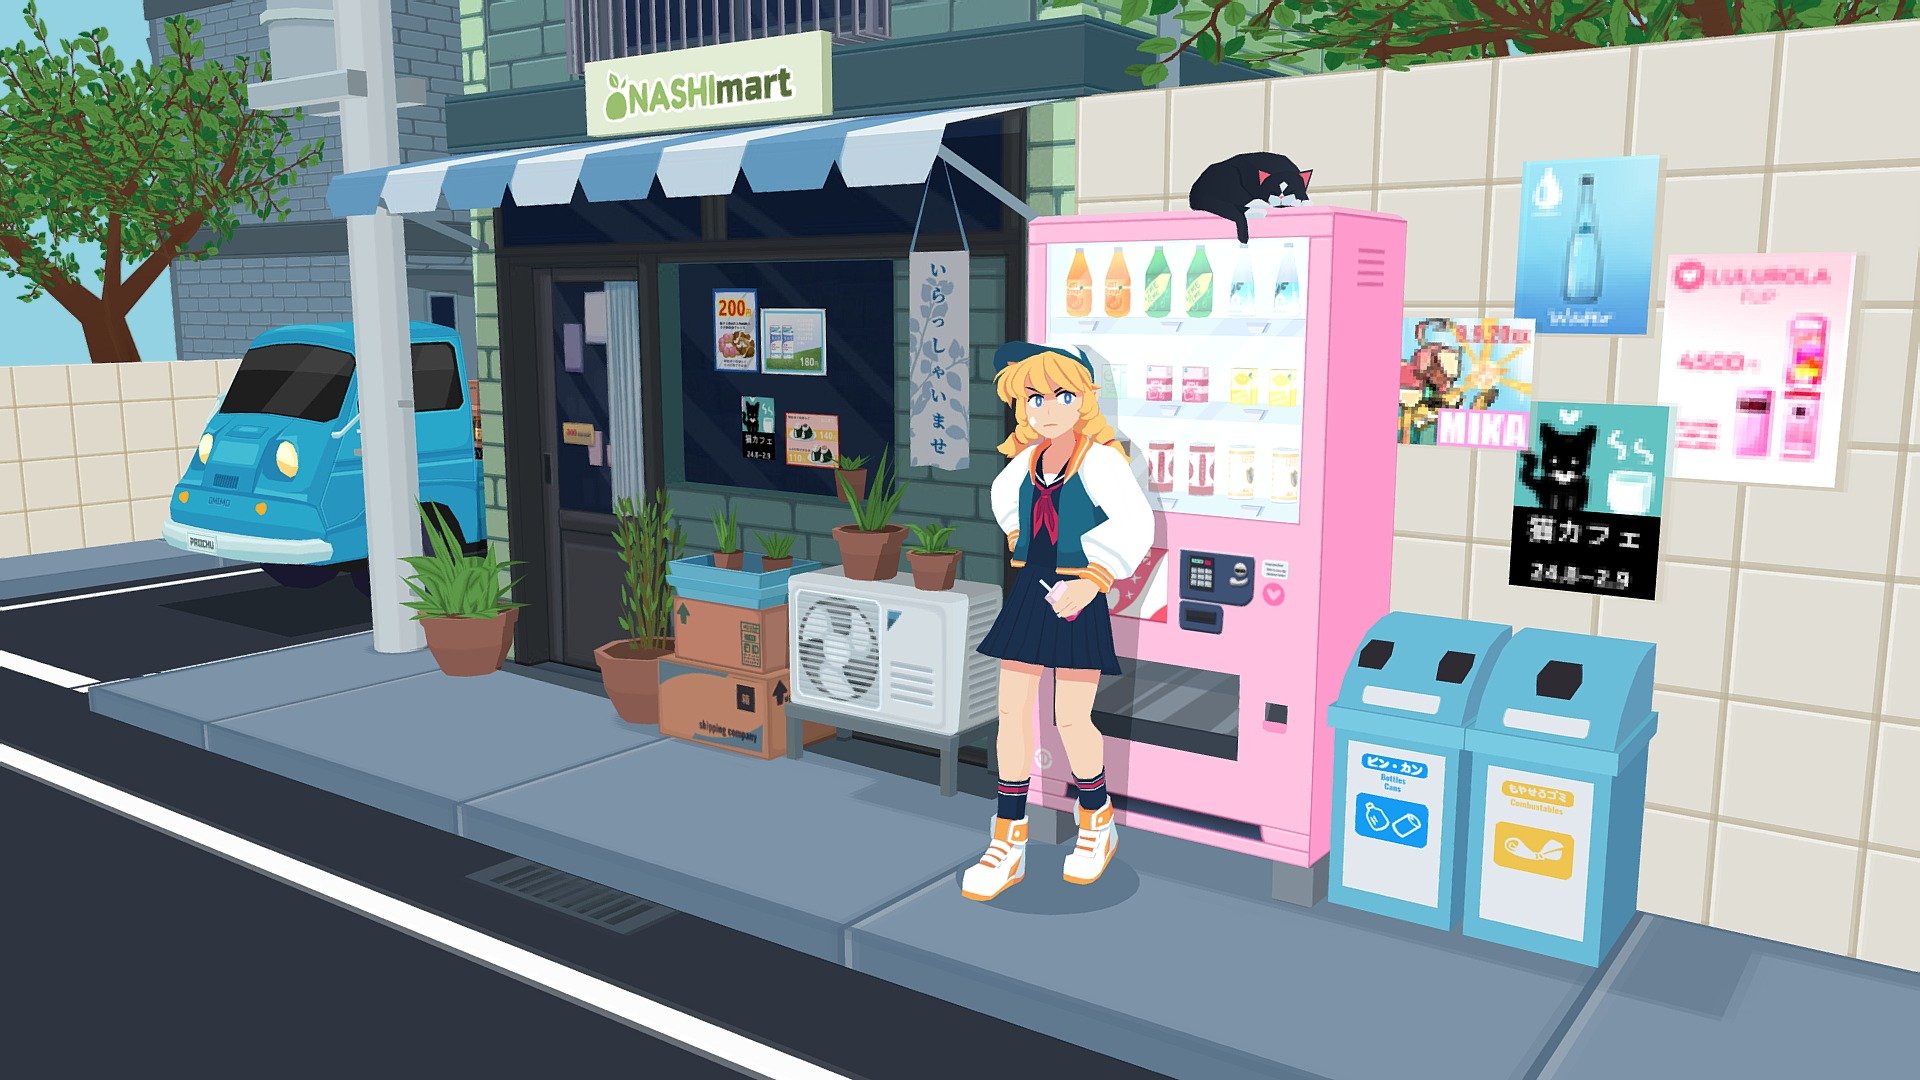 A little scene project I worked on for the month August! This is my OC, Yuuri. A delinquent girl taking a juice break.
The whole scene was a bit of practice with modeling props as well. Started from the vending machine and I just kept adding from there!

Music by r3tron - Juice Break - 3D model by Priichu 3d model